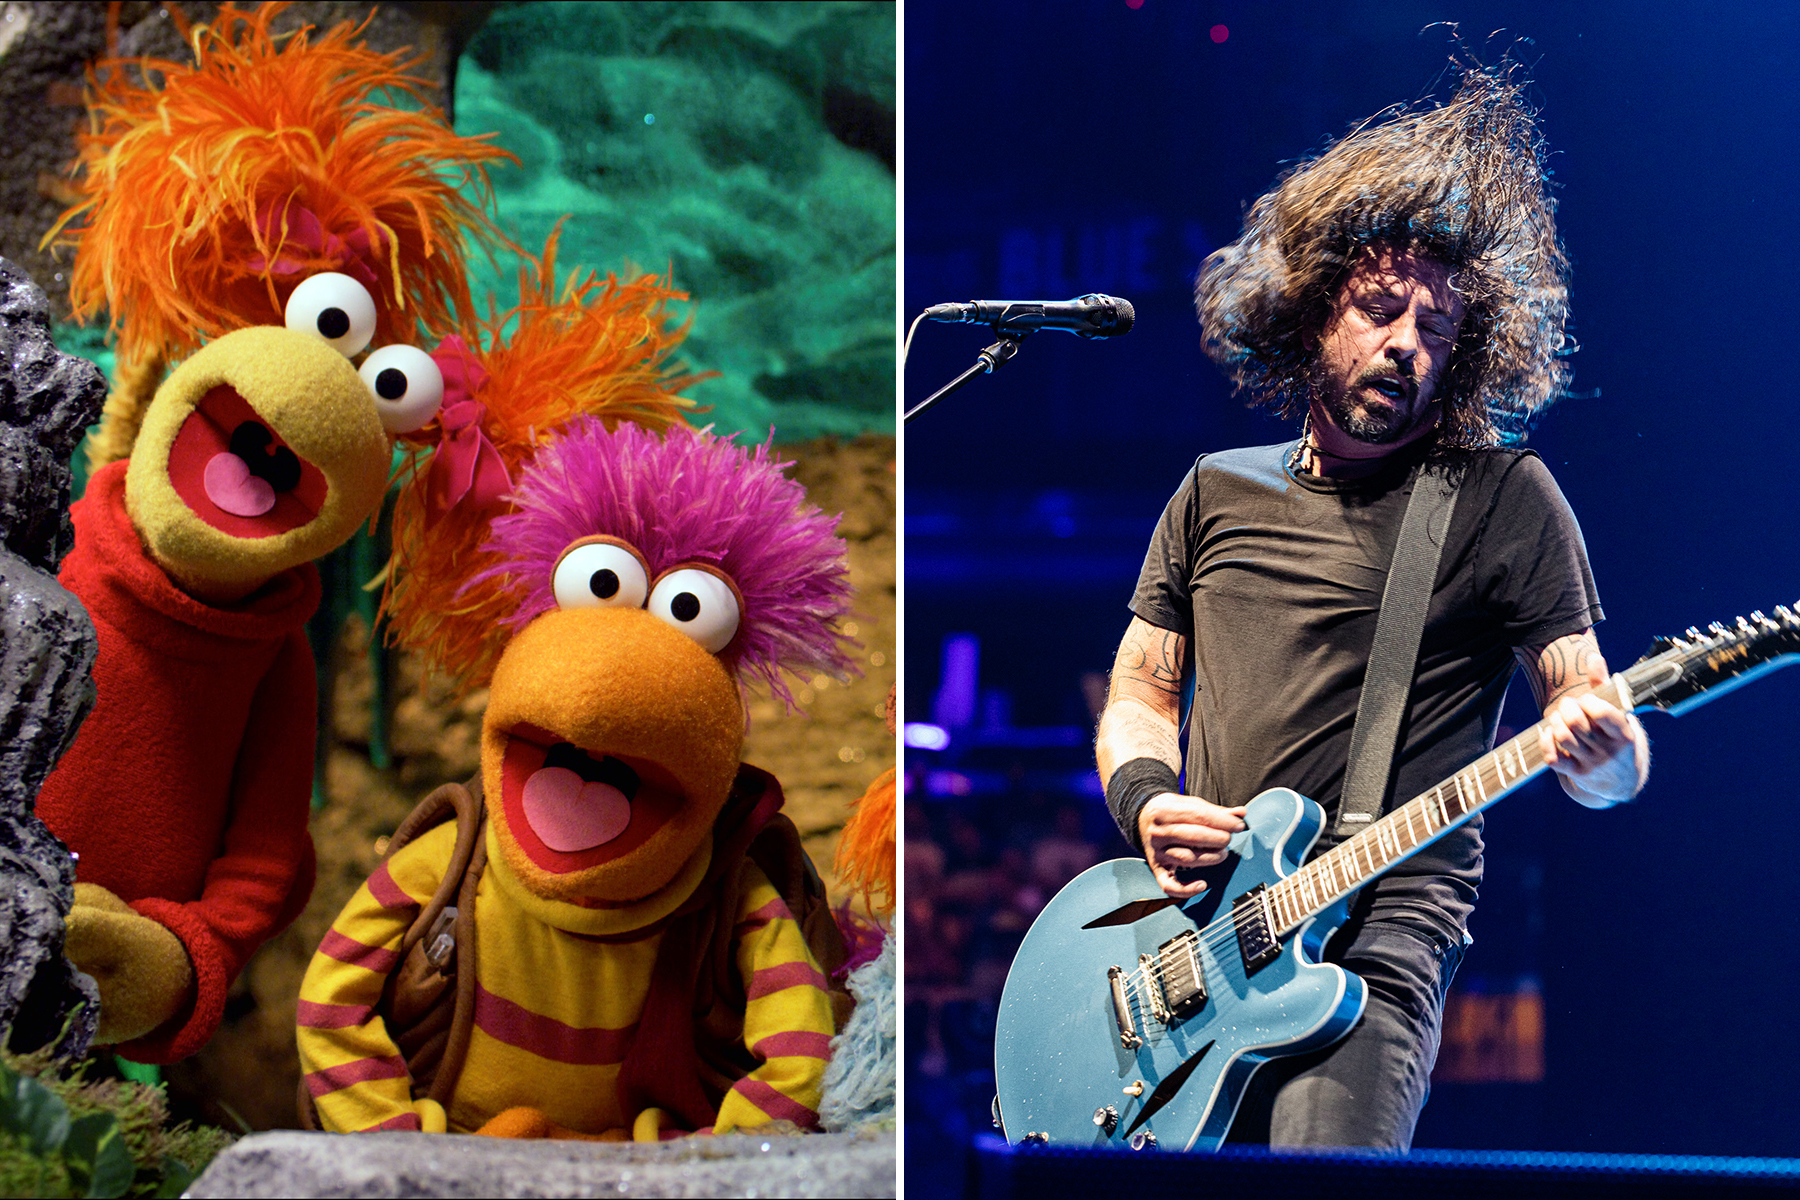 Dave Grohl’s new ‘Fraggle rock’ theme song. Why not?